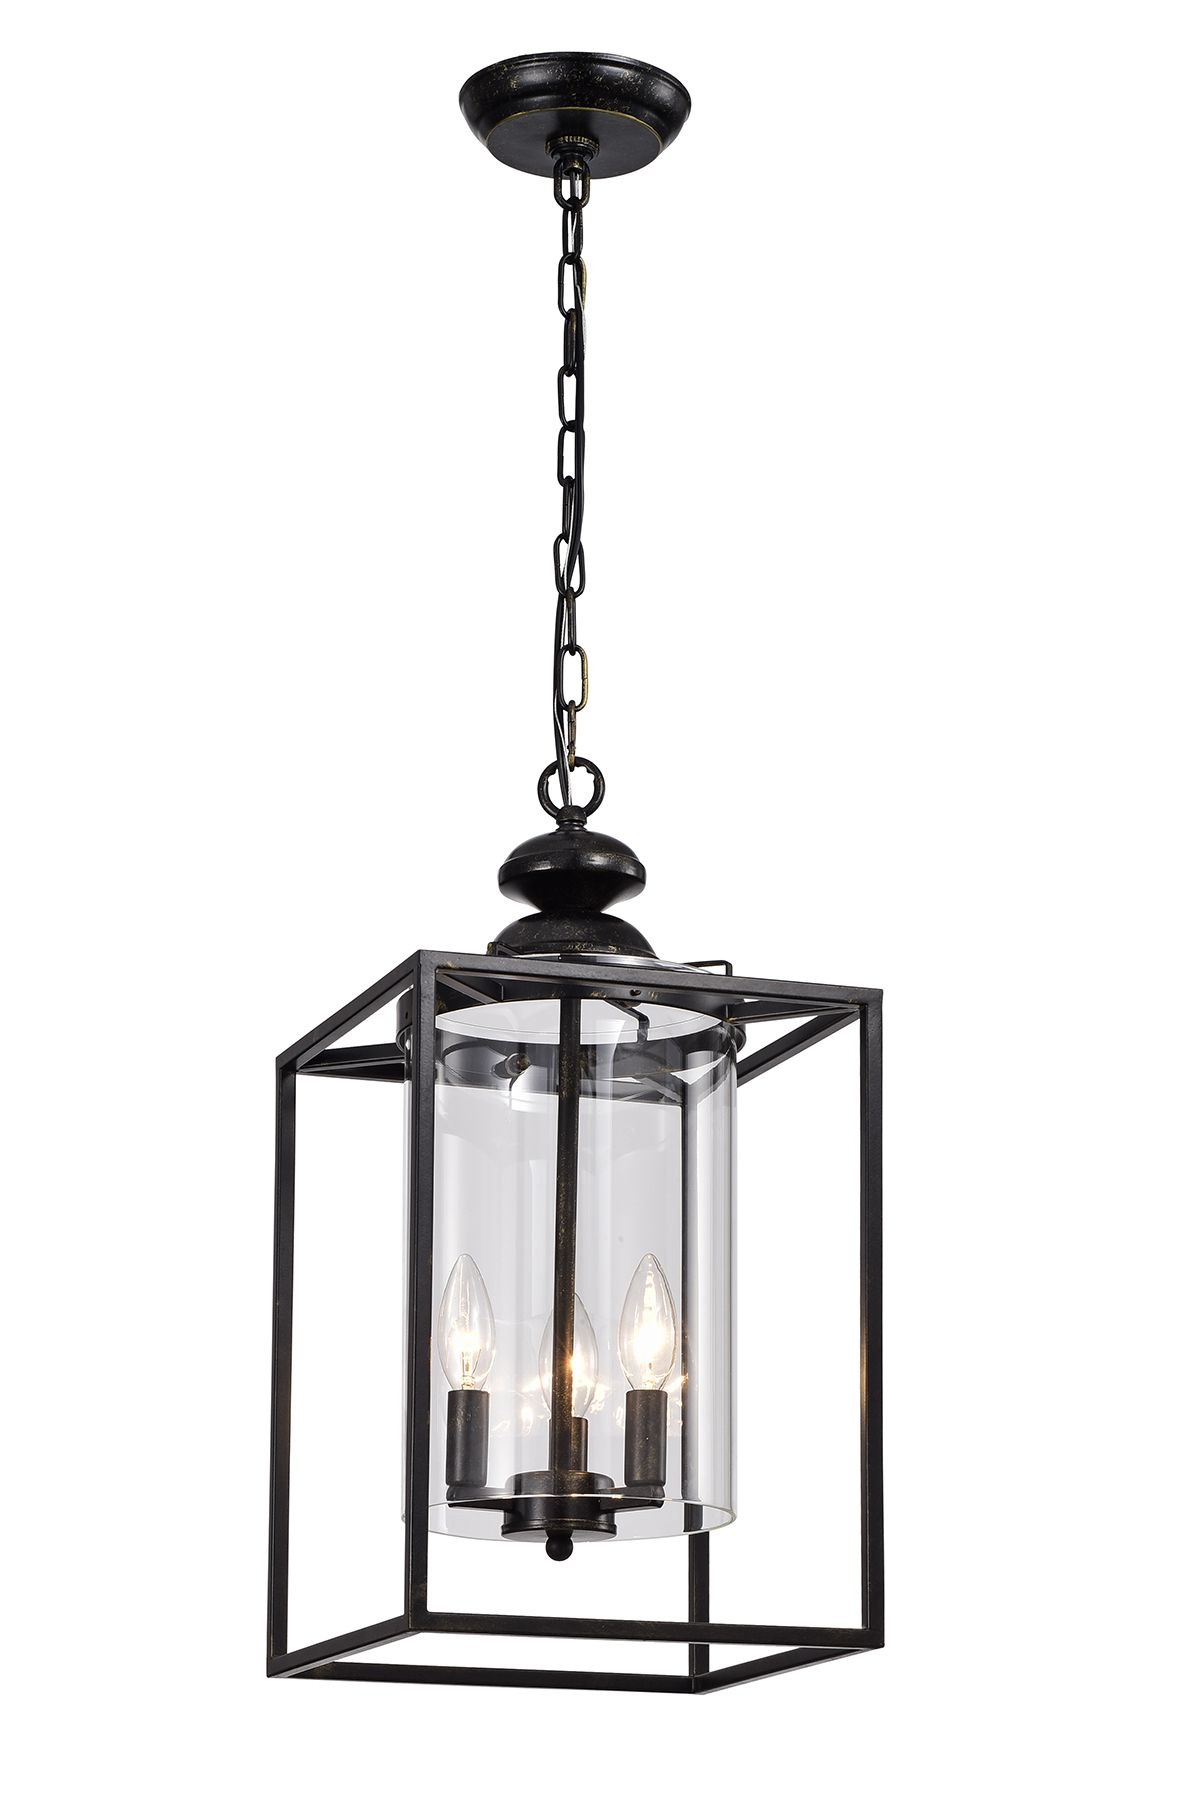 Fashionable Clear Glass Shade Lantern Chandeliers Within 3 Light Antique Bronze Metal Lantern Chandelier With A Hurricane Glass Shade  – Edvivi Lighting (View 12 of 15)